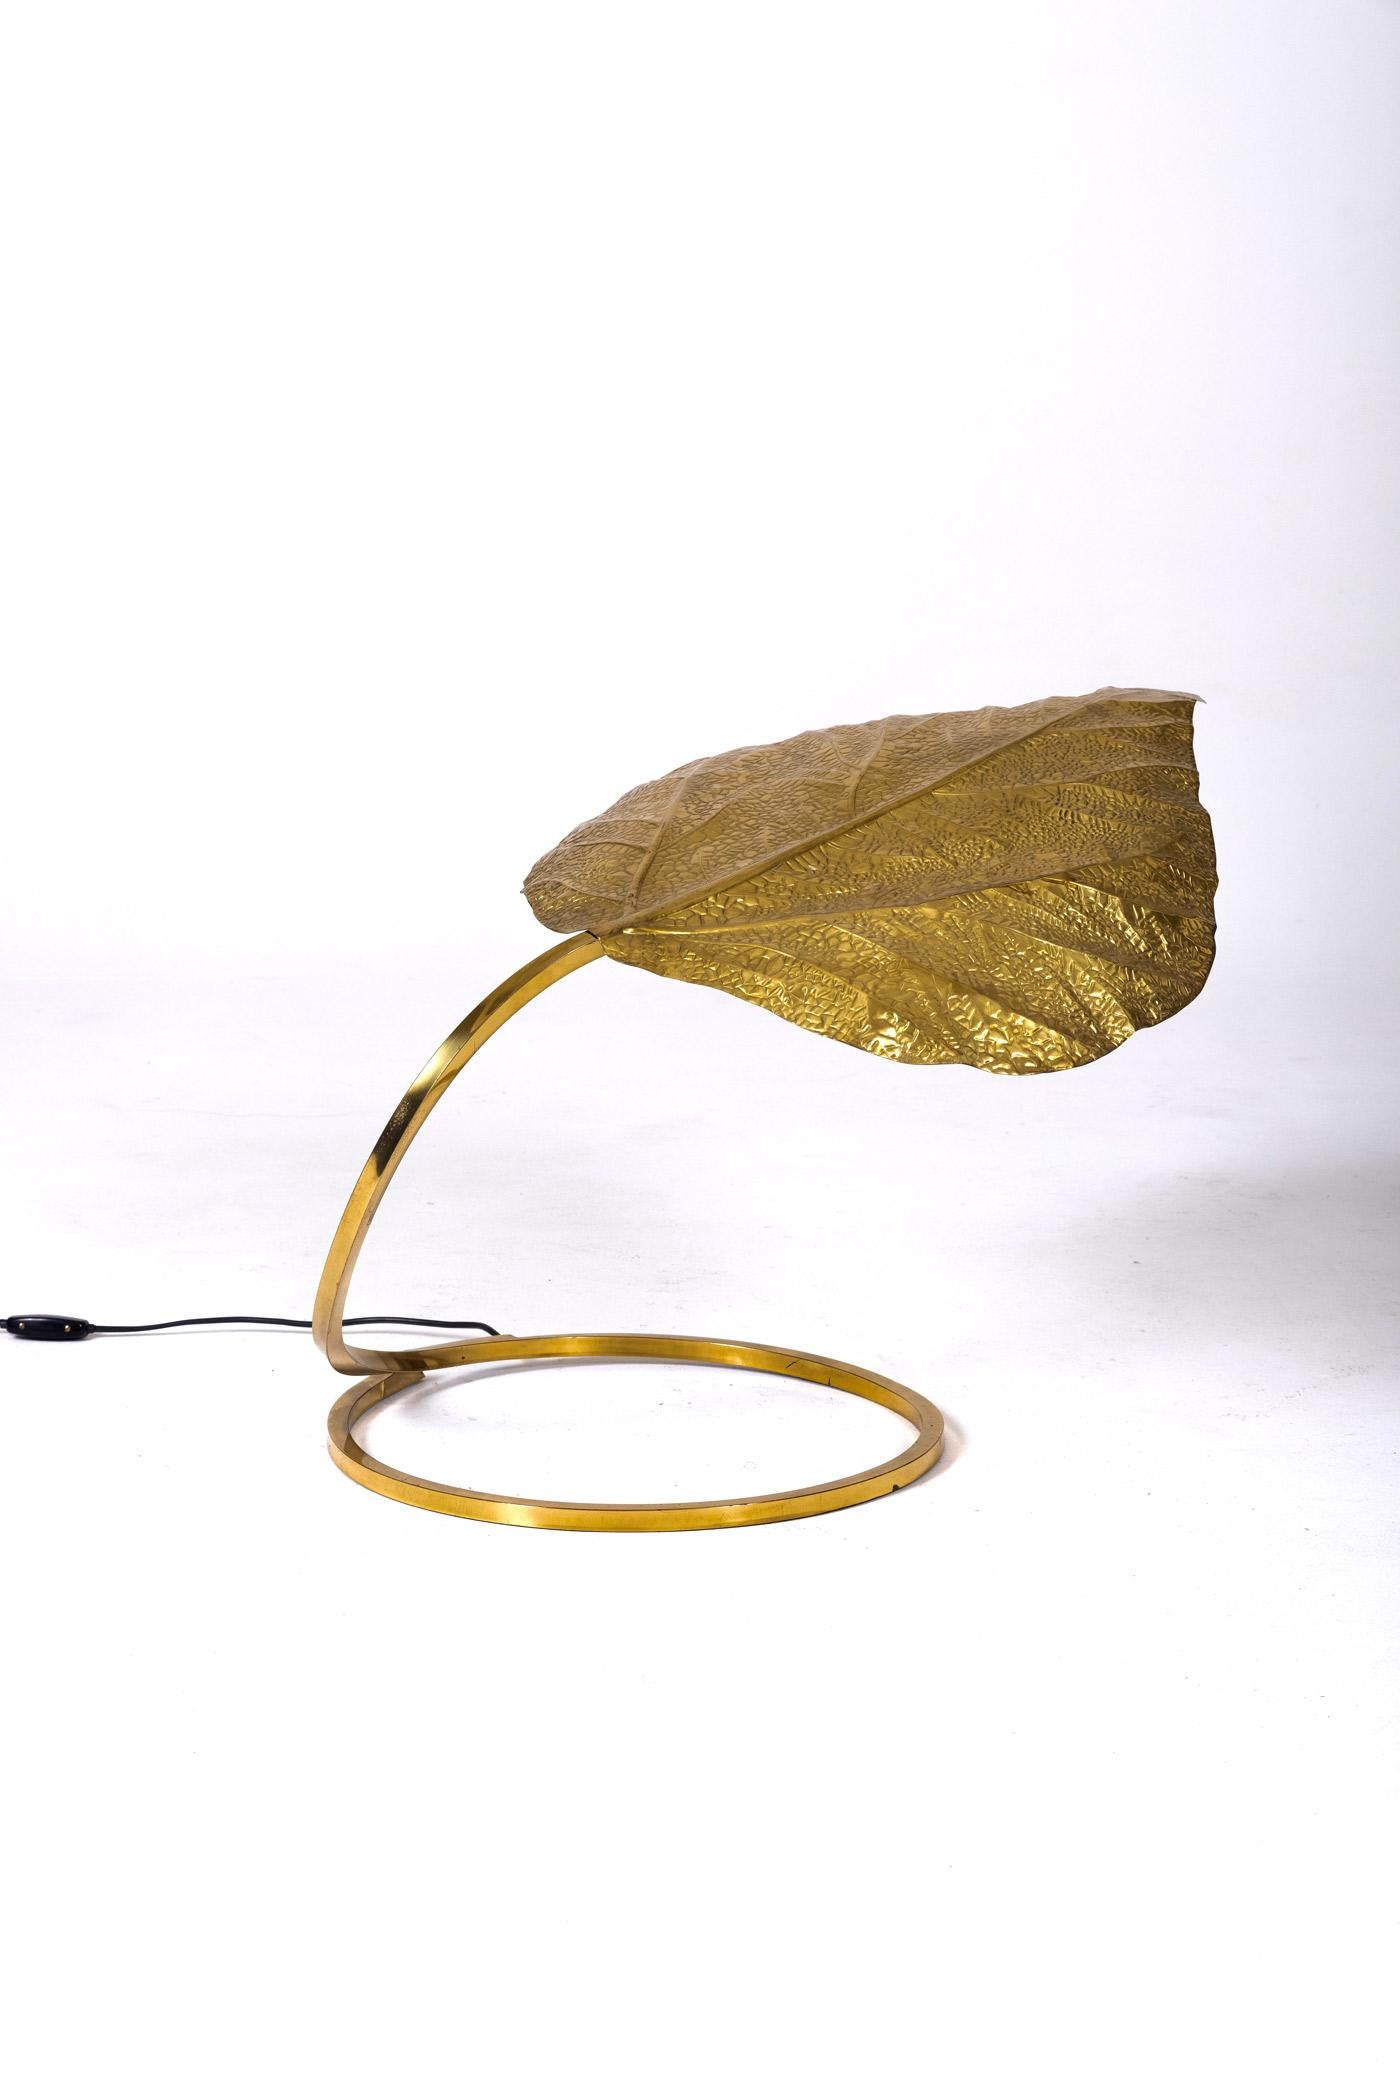 Brass leaf-shaped lamp attributed to designer Tommaso Barbi for Bottega Sad in the 1970s. This lamp is fully functional and pairs seamlessly with furniture by designers like Gérard Guermonprez, Maison Regain, or Guillerme & Chambron.
DV172